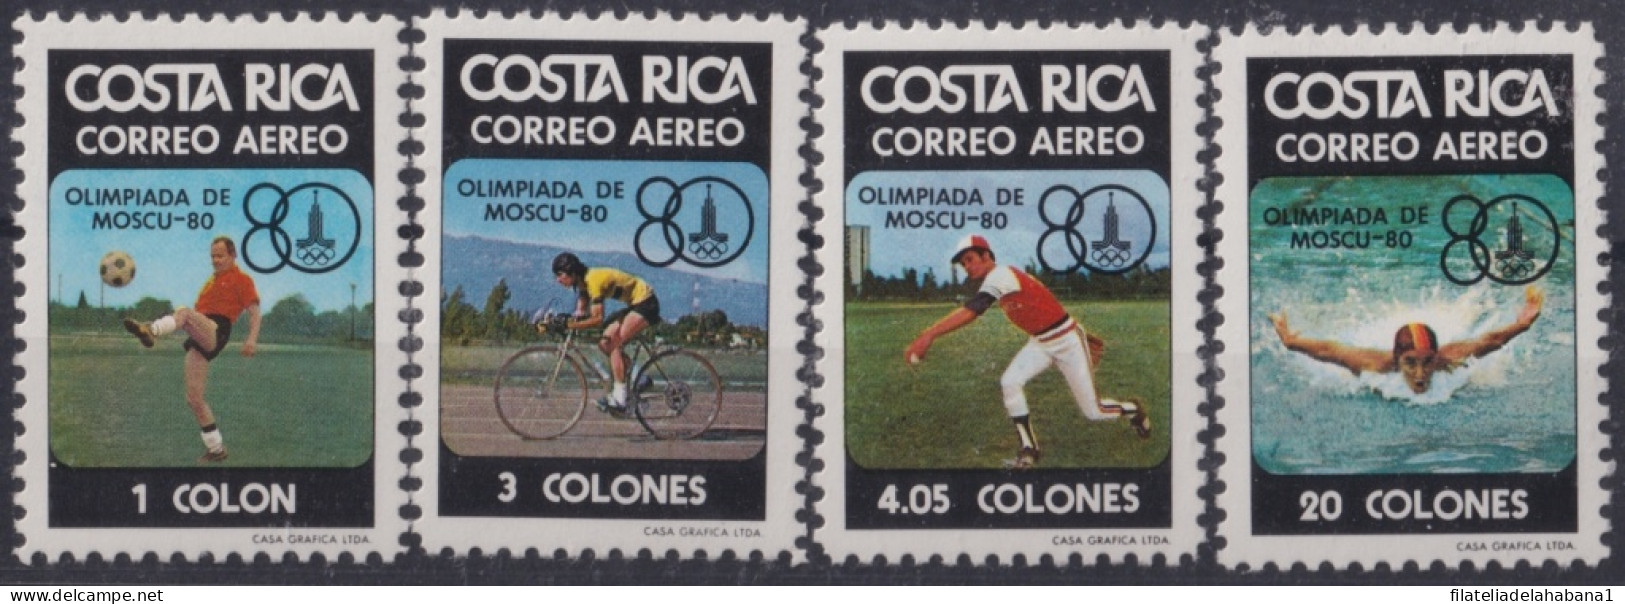 F-EX50099 COSTA RICA MNH 1980 MOSCOW OLYMPIC GAMES CICLING SOCCER BASEBALL.          - Verano 1980: Moscu